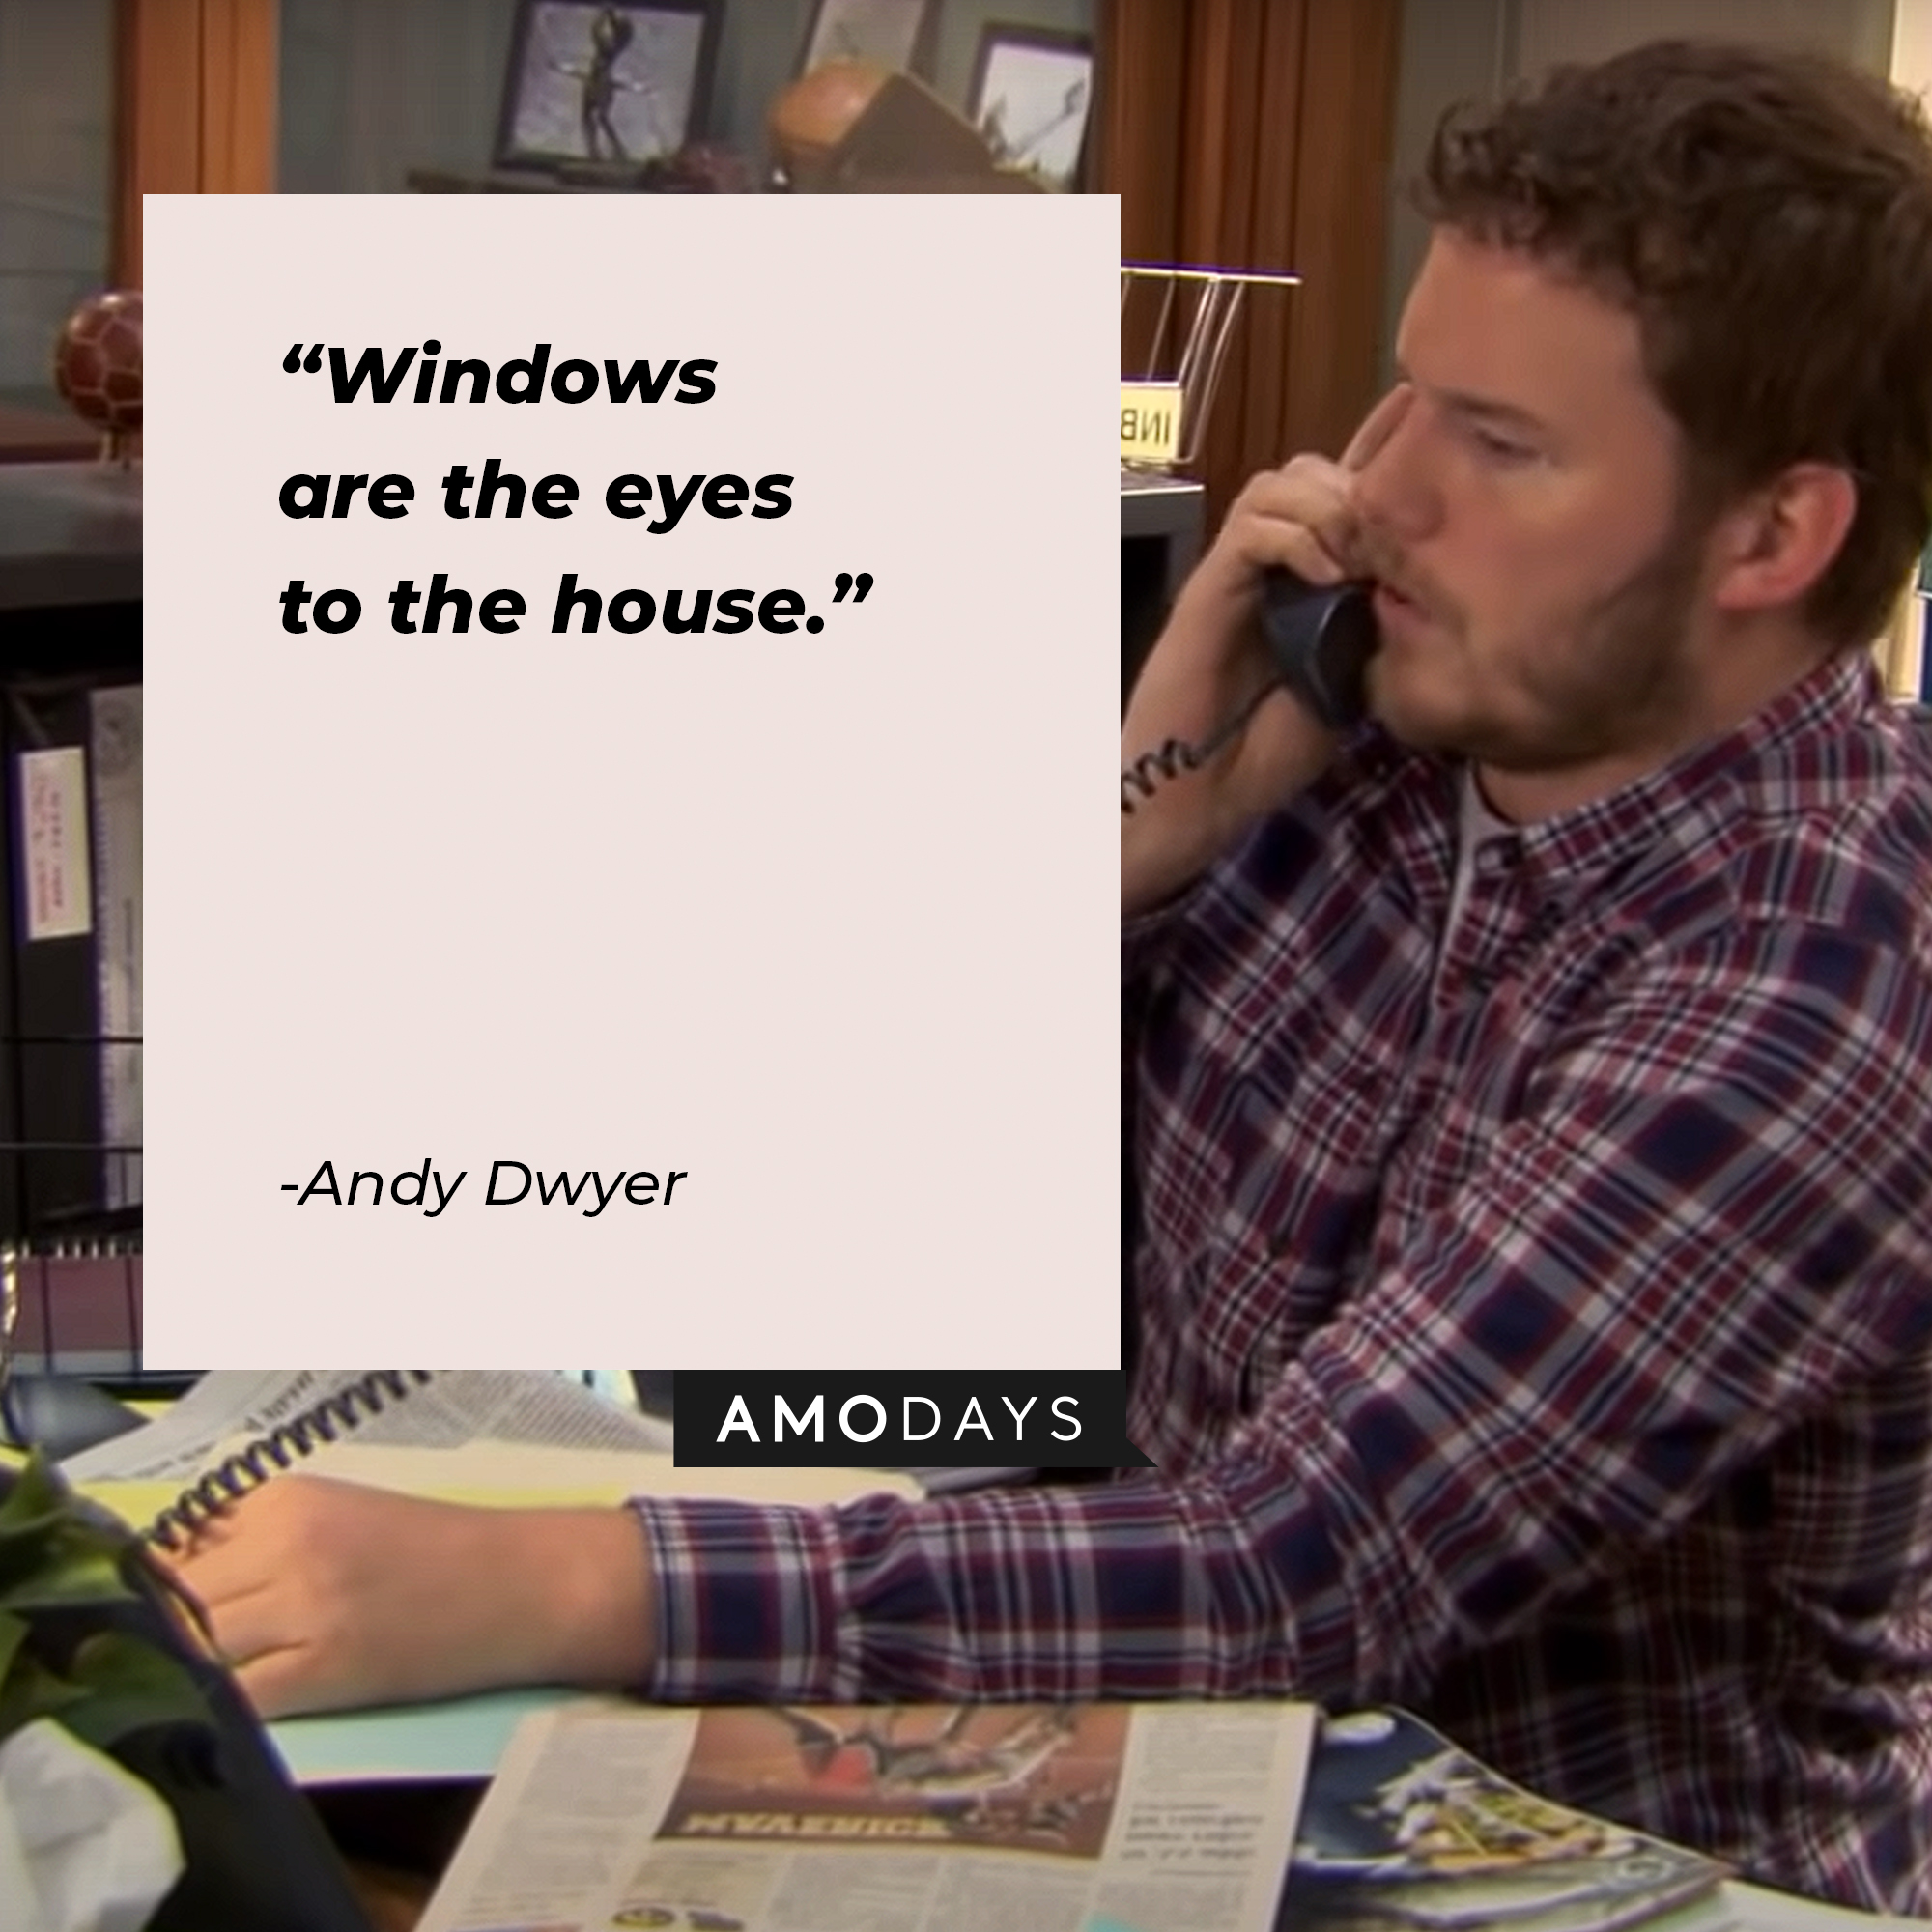 A picture of Andy Dwyer with his quote: “Windows are the eyes to the house." | Source: youtube.com/ParksandRecreation